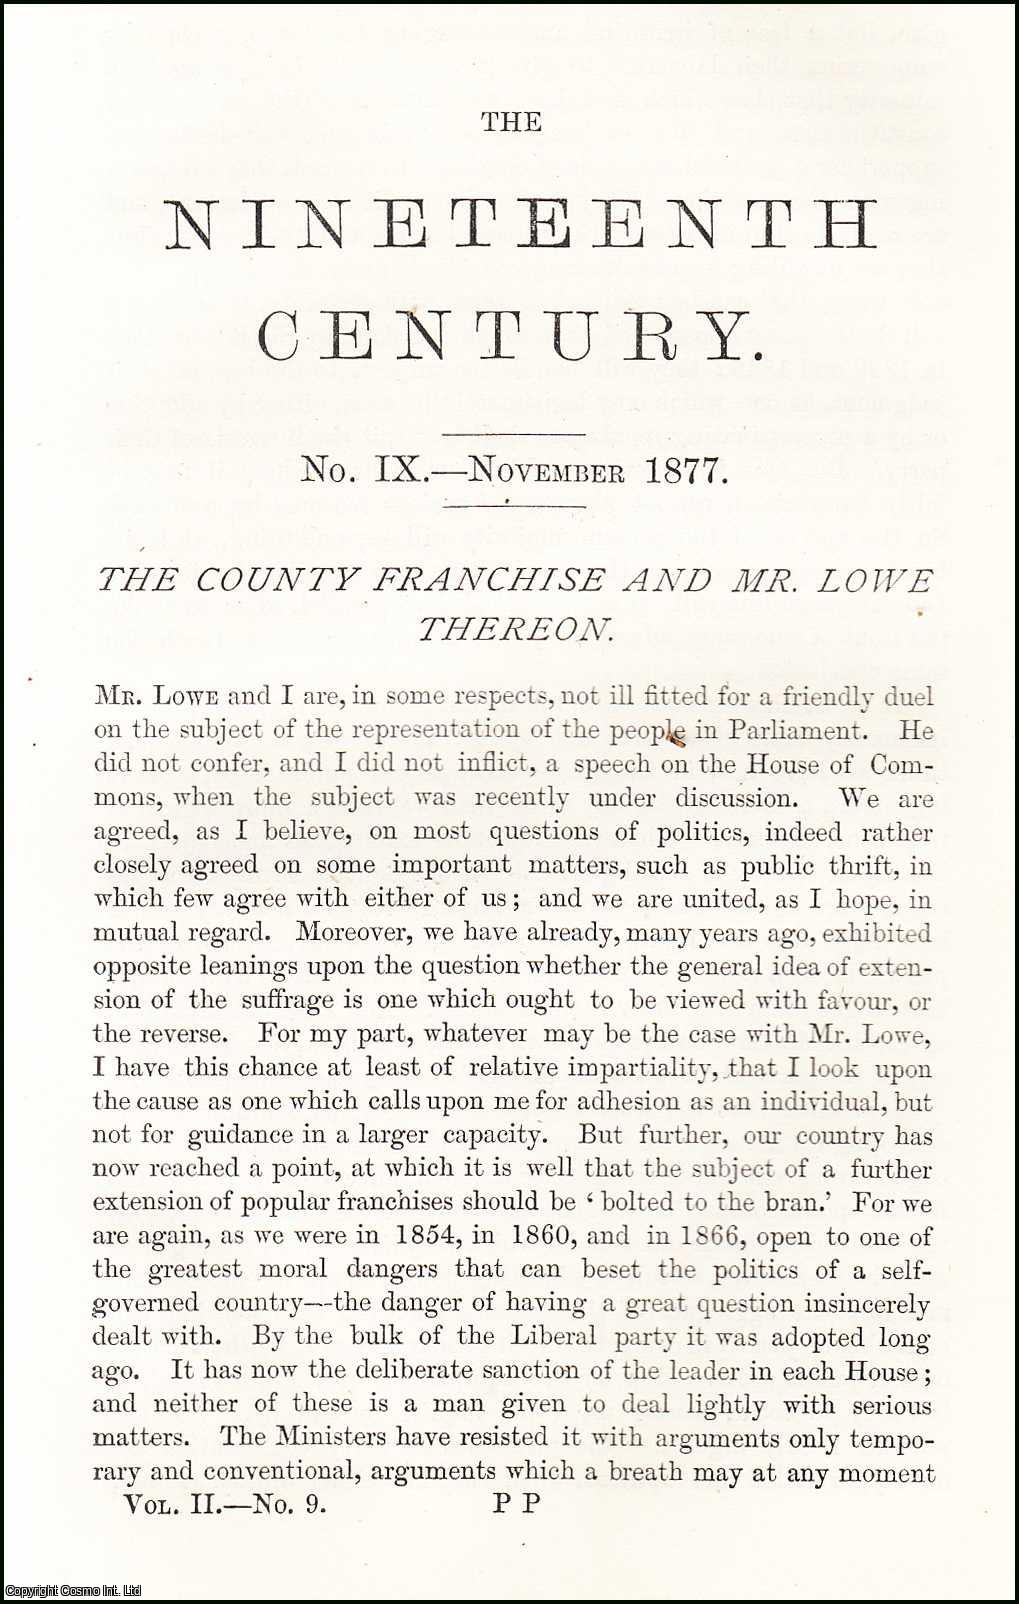 W.E. Gladstone - The County Franchise and Mr. Lowe Thereon. An original article from the Nineteenth Century Magazine, 1877.